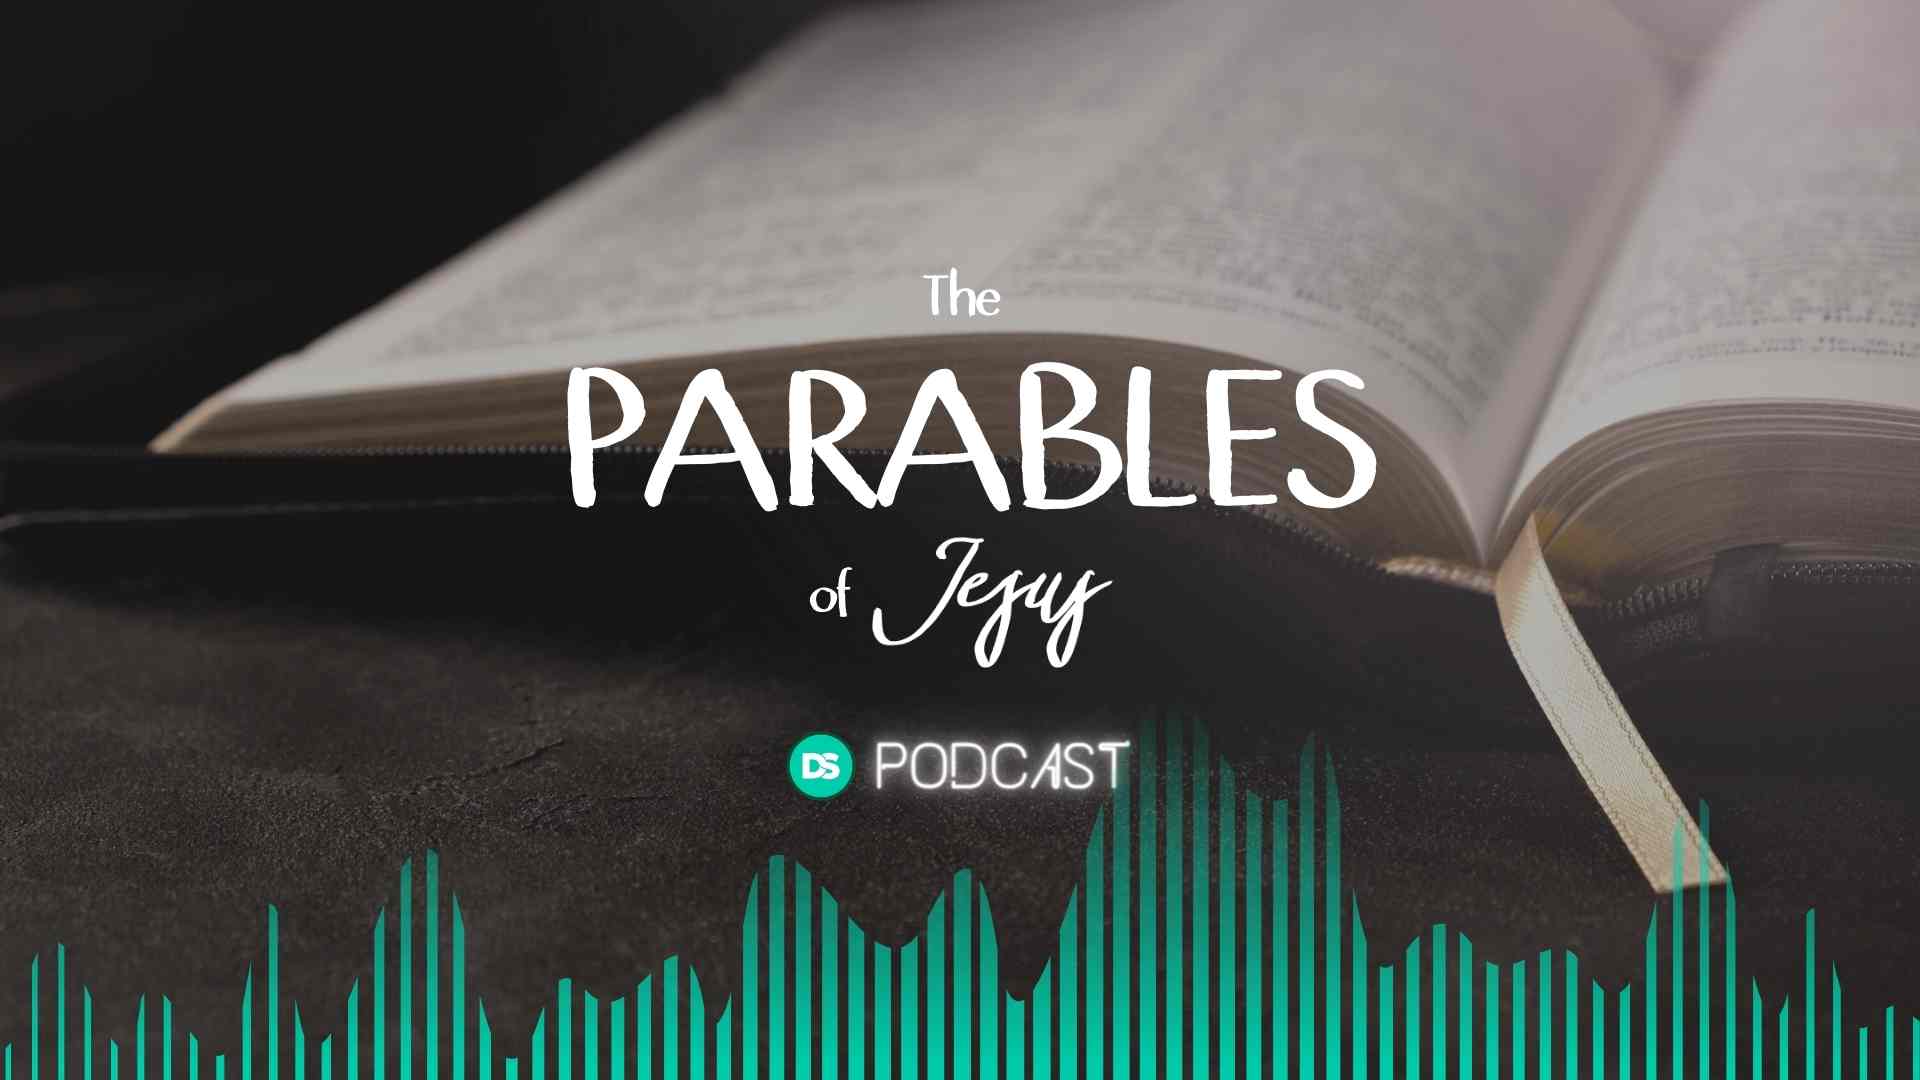 Introducing Our New Series on the Parables of Jesus 15